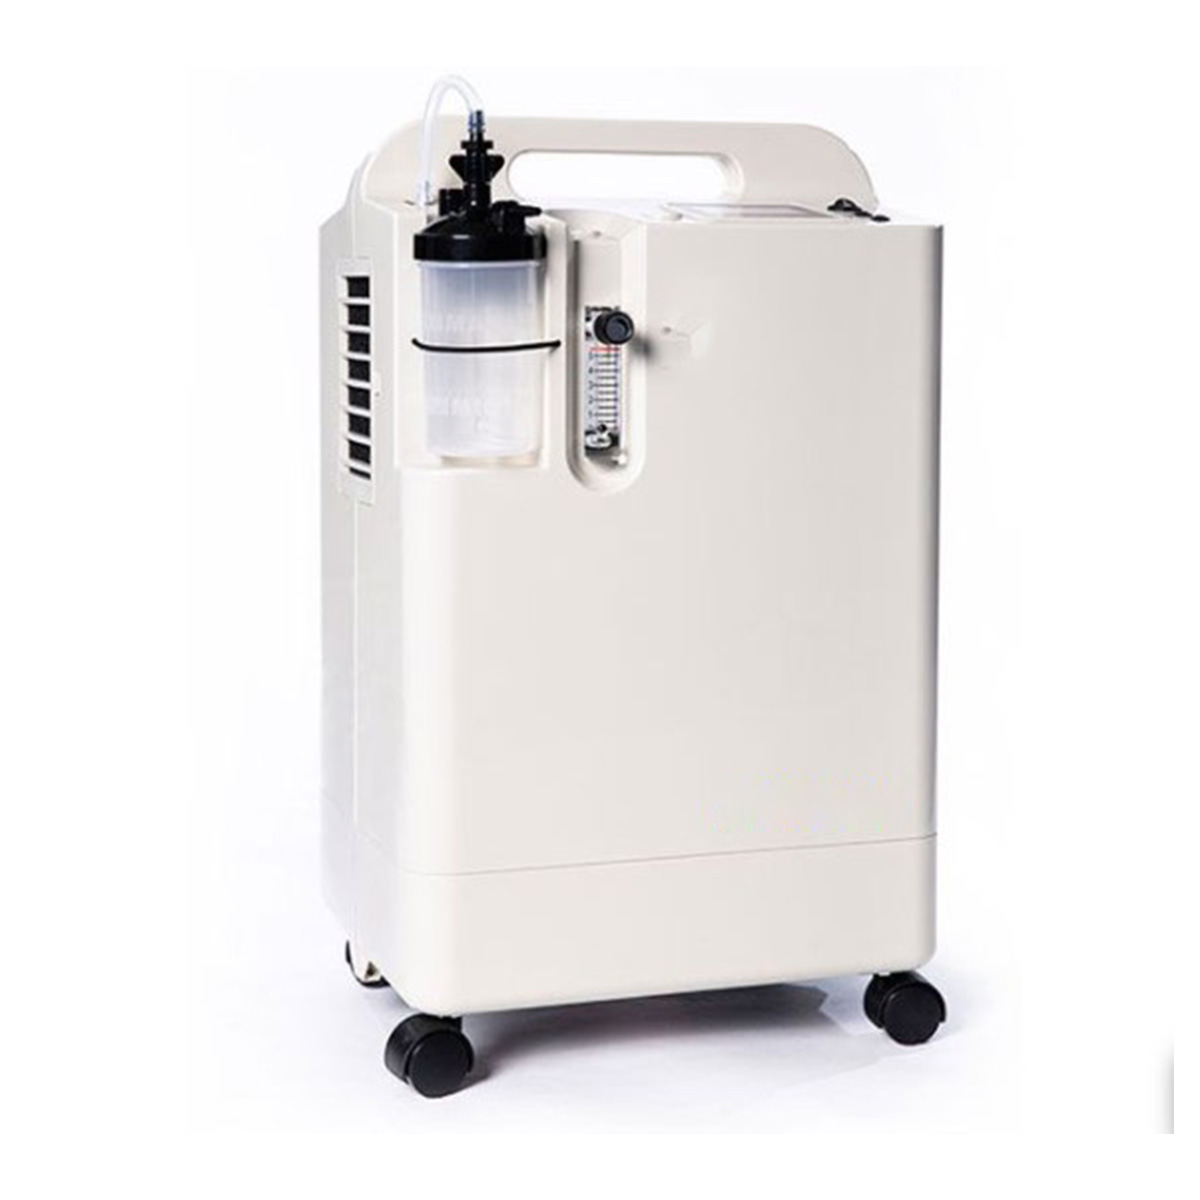 5 Longfian Oxygen Concentrator On Sale Suppliers, Service Provider in Anand lok